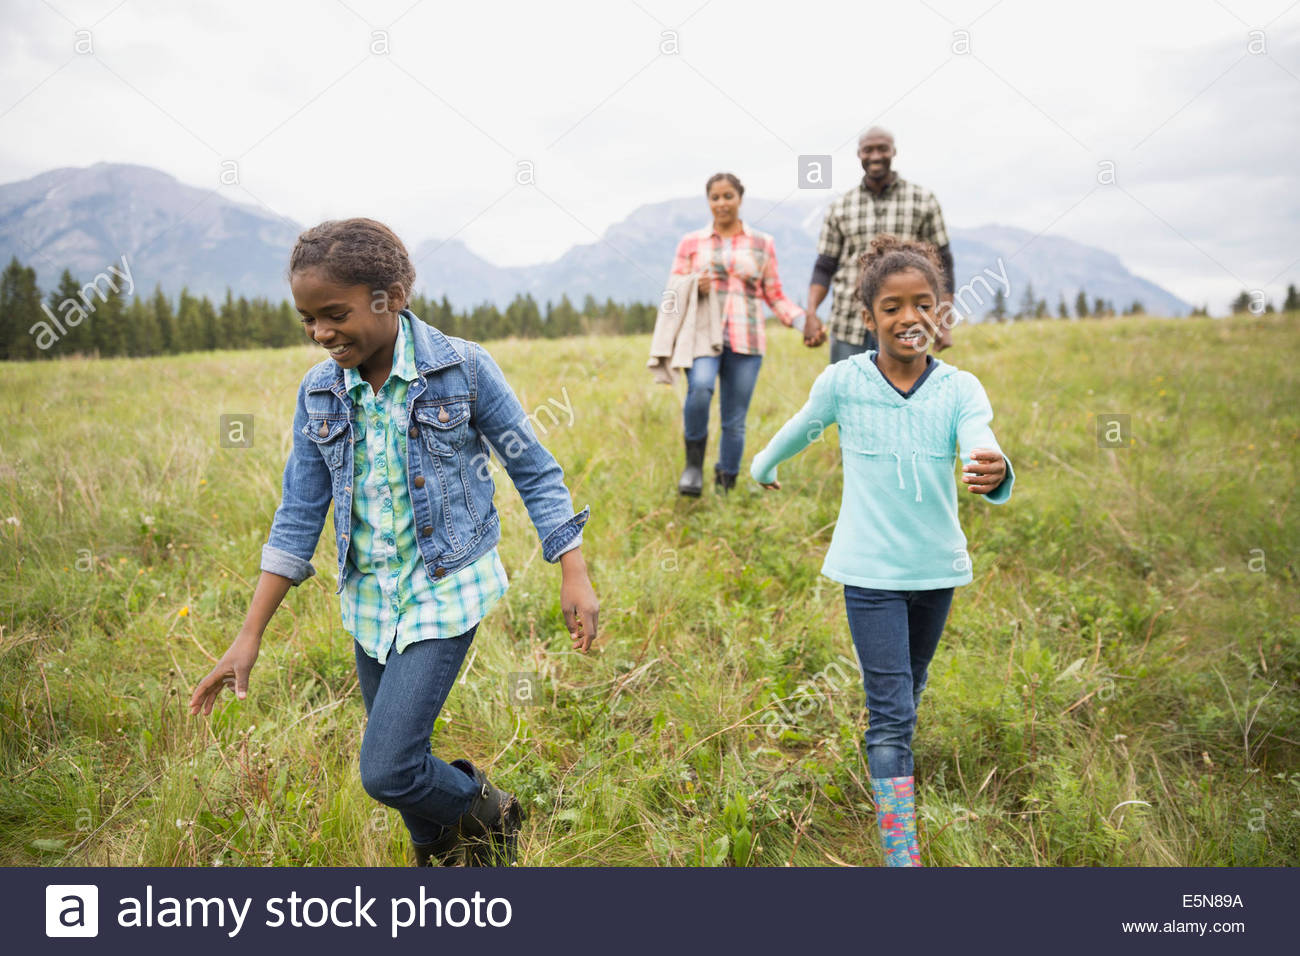 Family walking in grassy field Banque D'Images